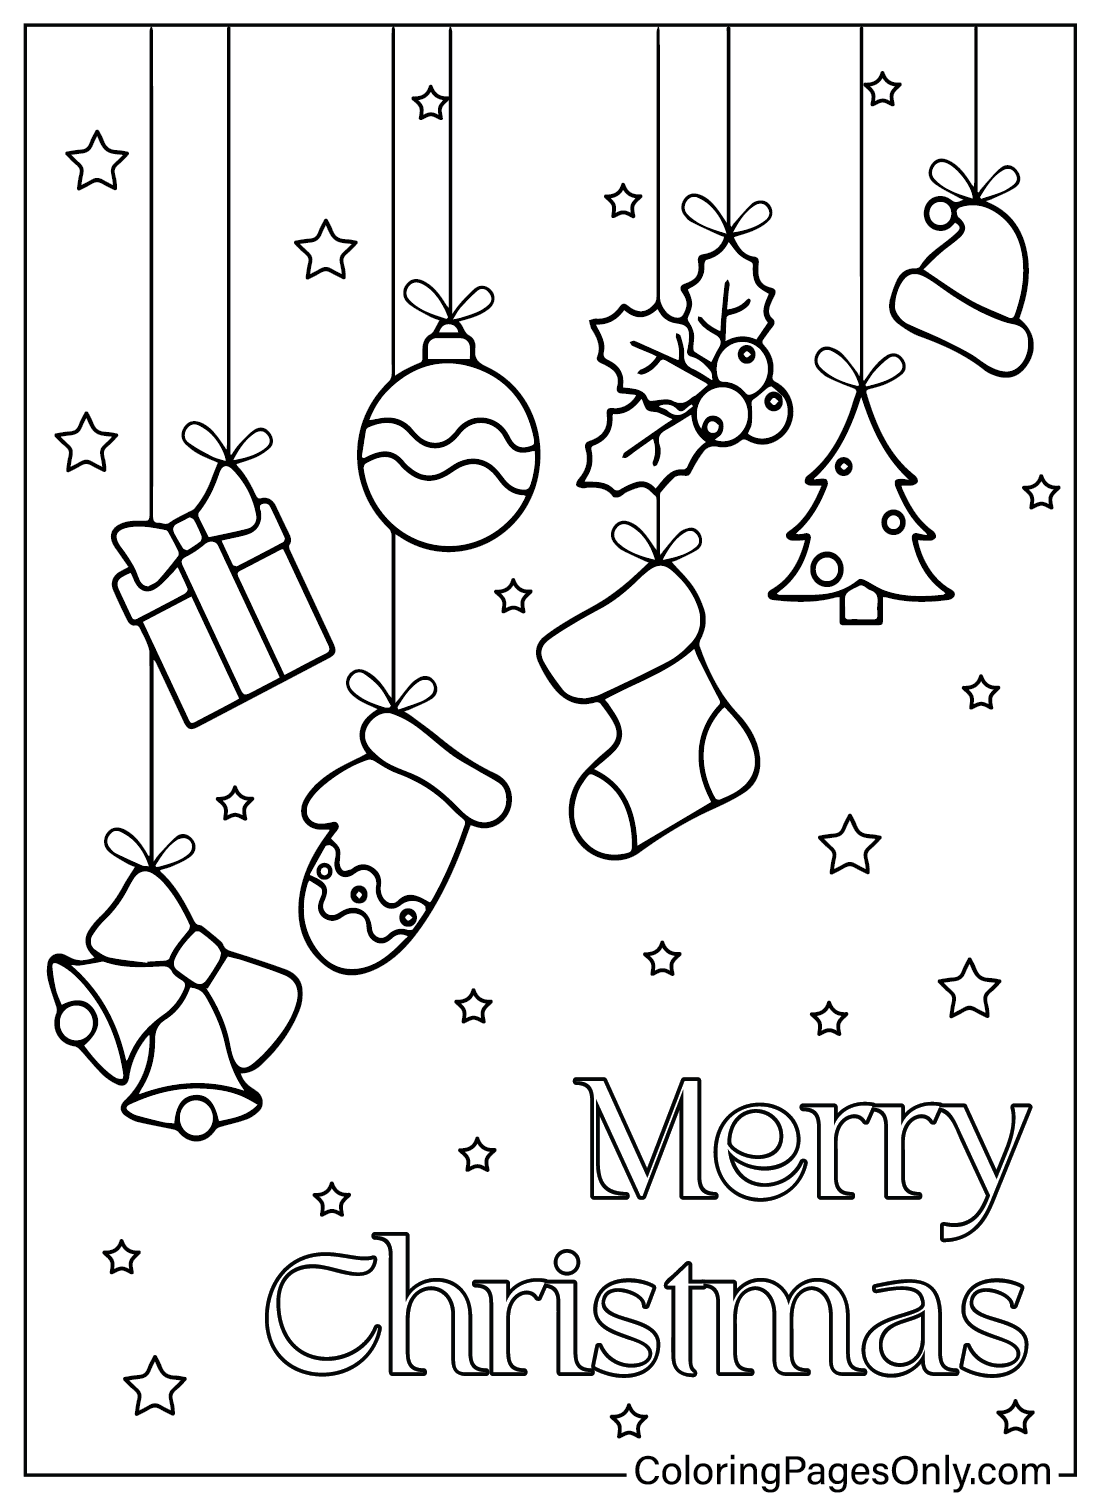 Christmas Ornaments Coloring Pages to Printable